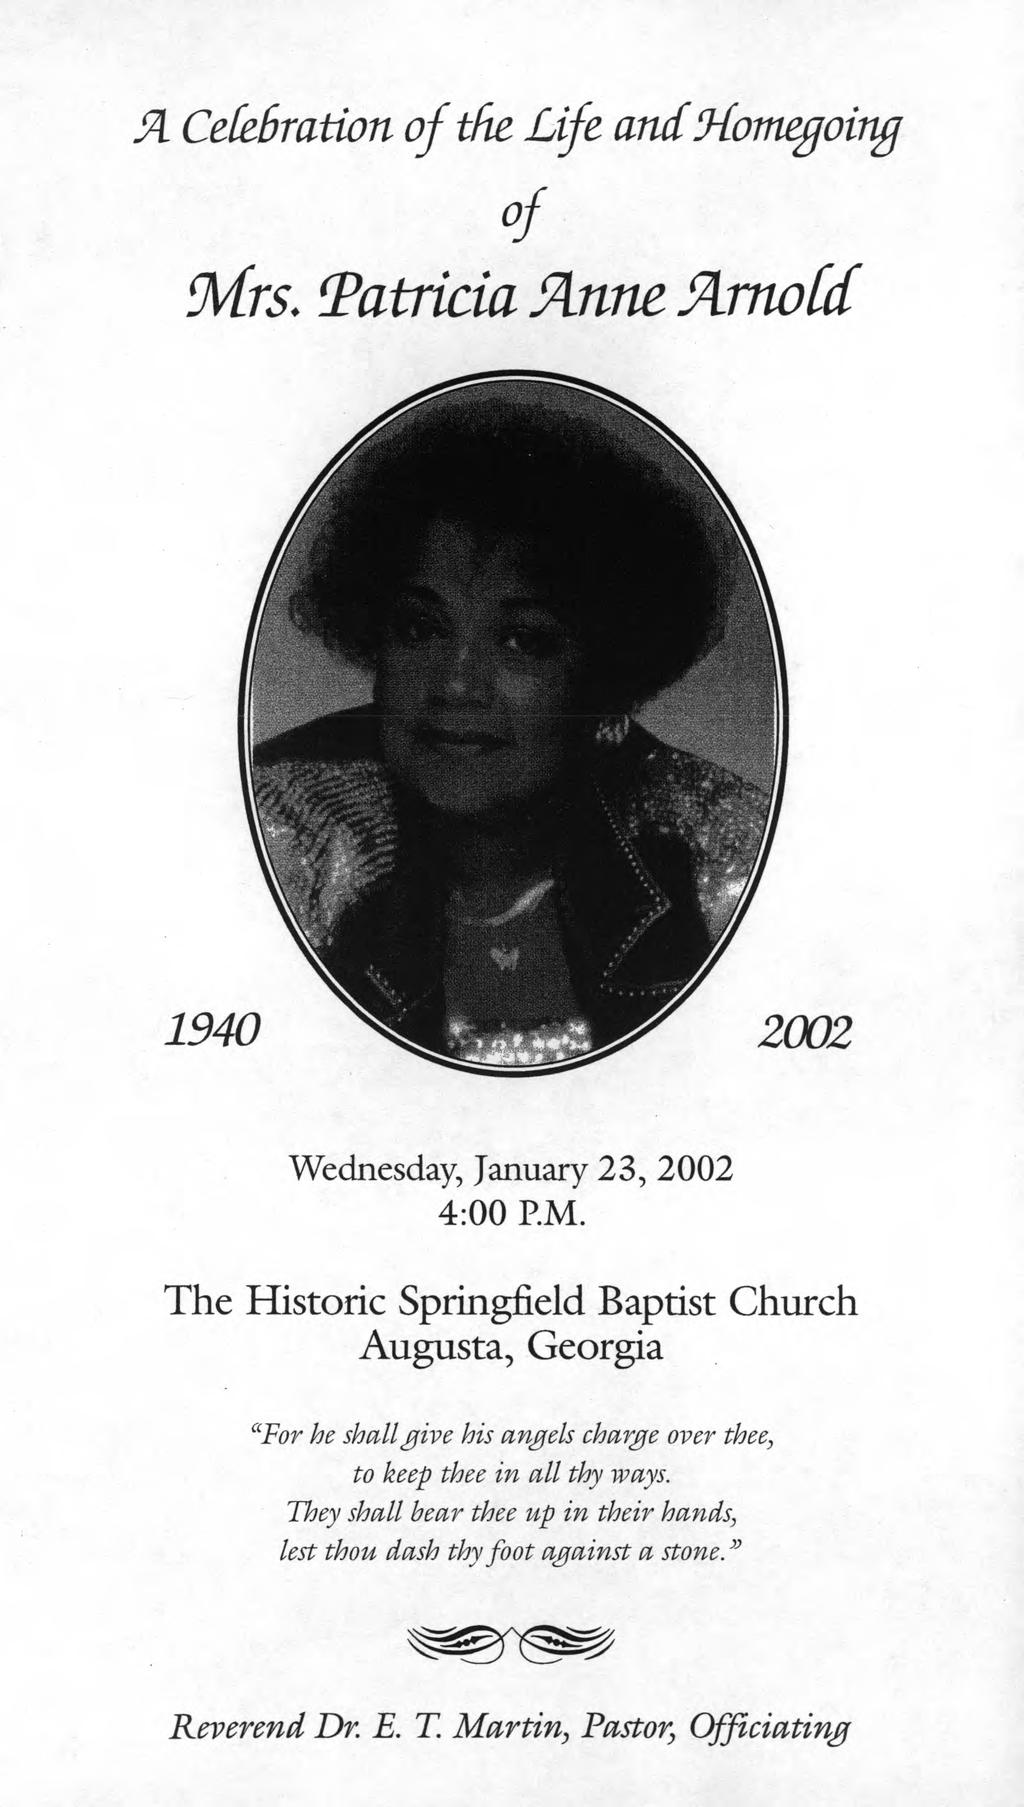 J3L Cekbmtion of the. Life, and ttomegoity of Mrs. Patricia ftnne ftrnotd 1940 2002. Wednesday, January 23, 2002 4:00 P.M. The Historic Springfield Baptist Church Augusta, Georgia "For he shall give his angels charge over thee, / to keep thee in all thy ways.